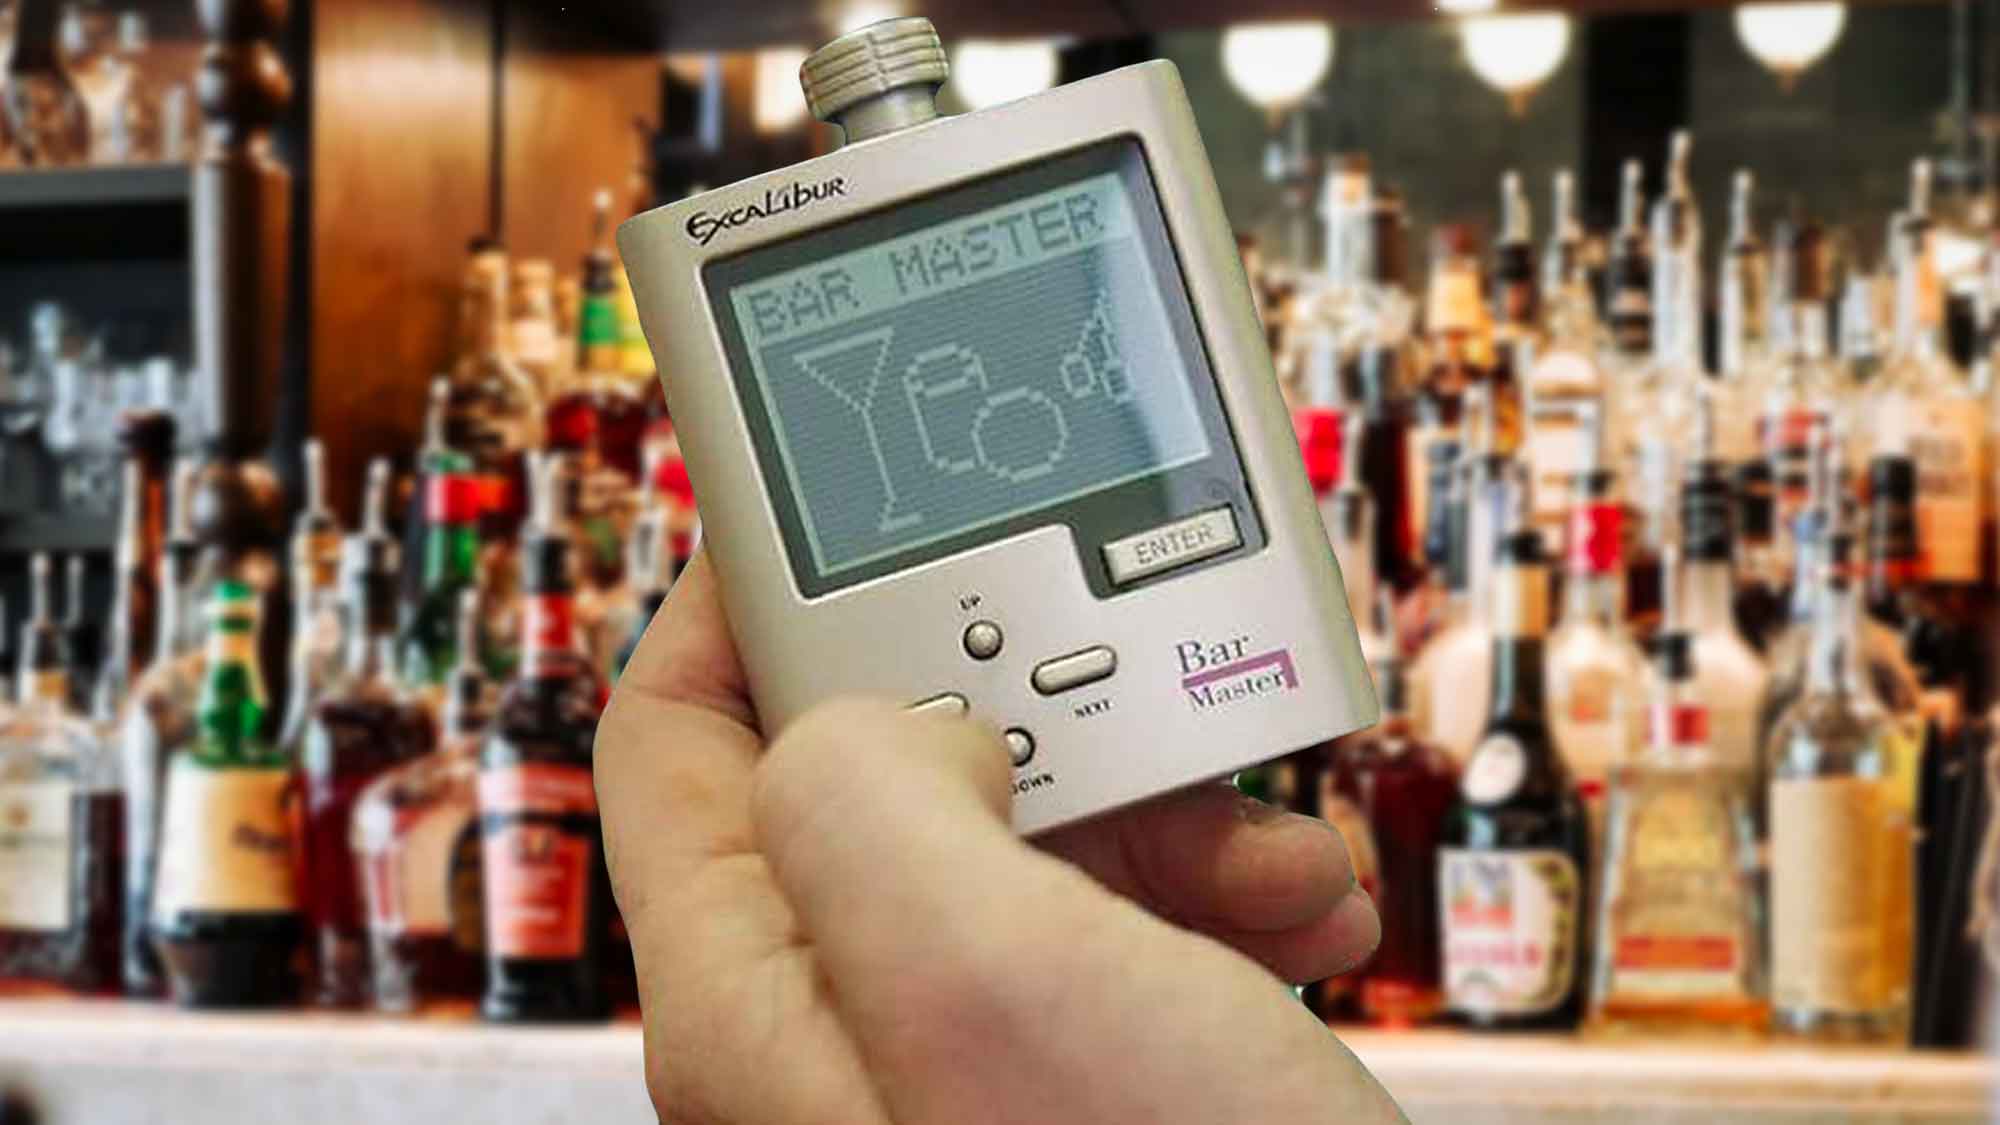 Never Mix A Bad Cocktail Again With The BarMaster Drink Computer